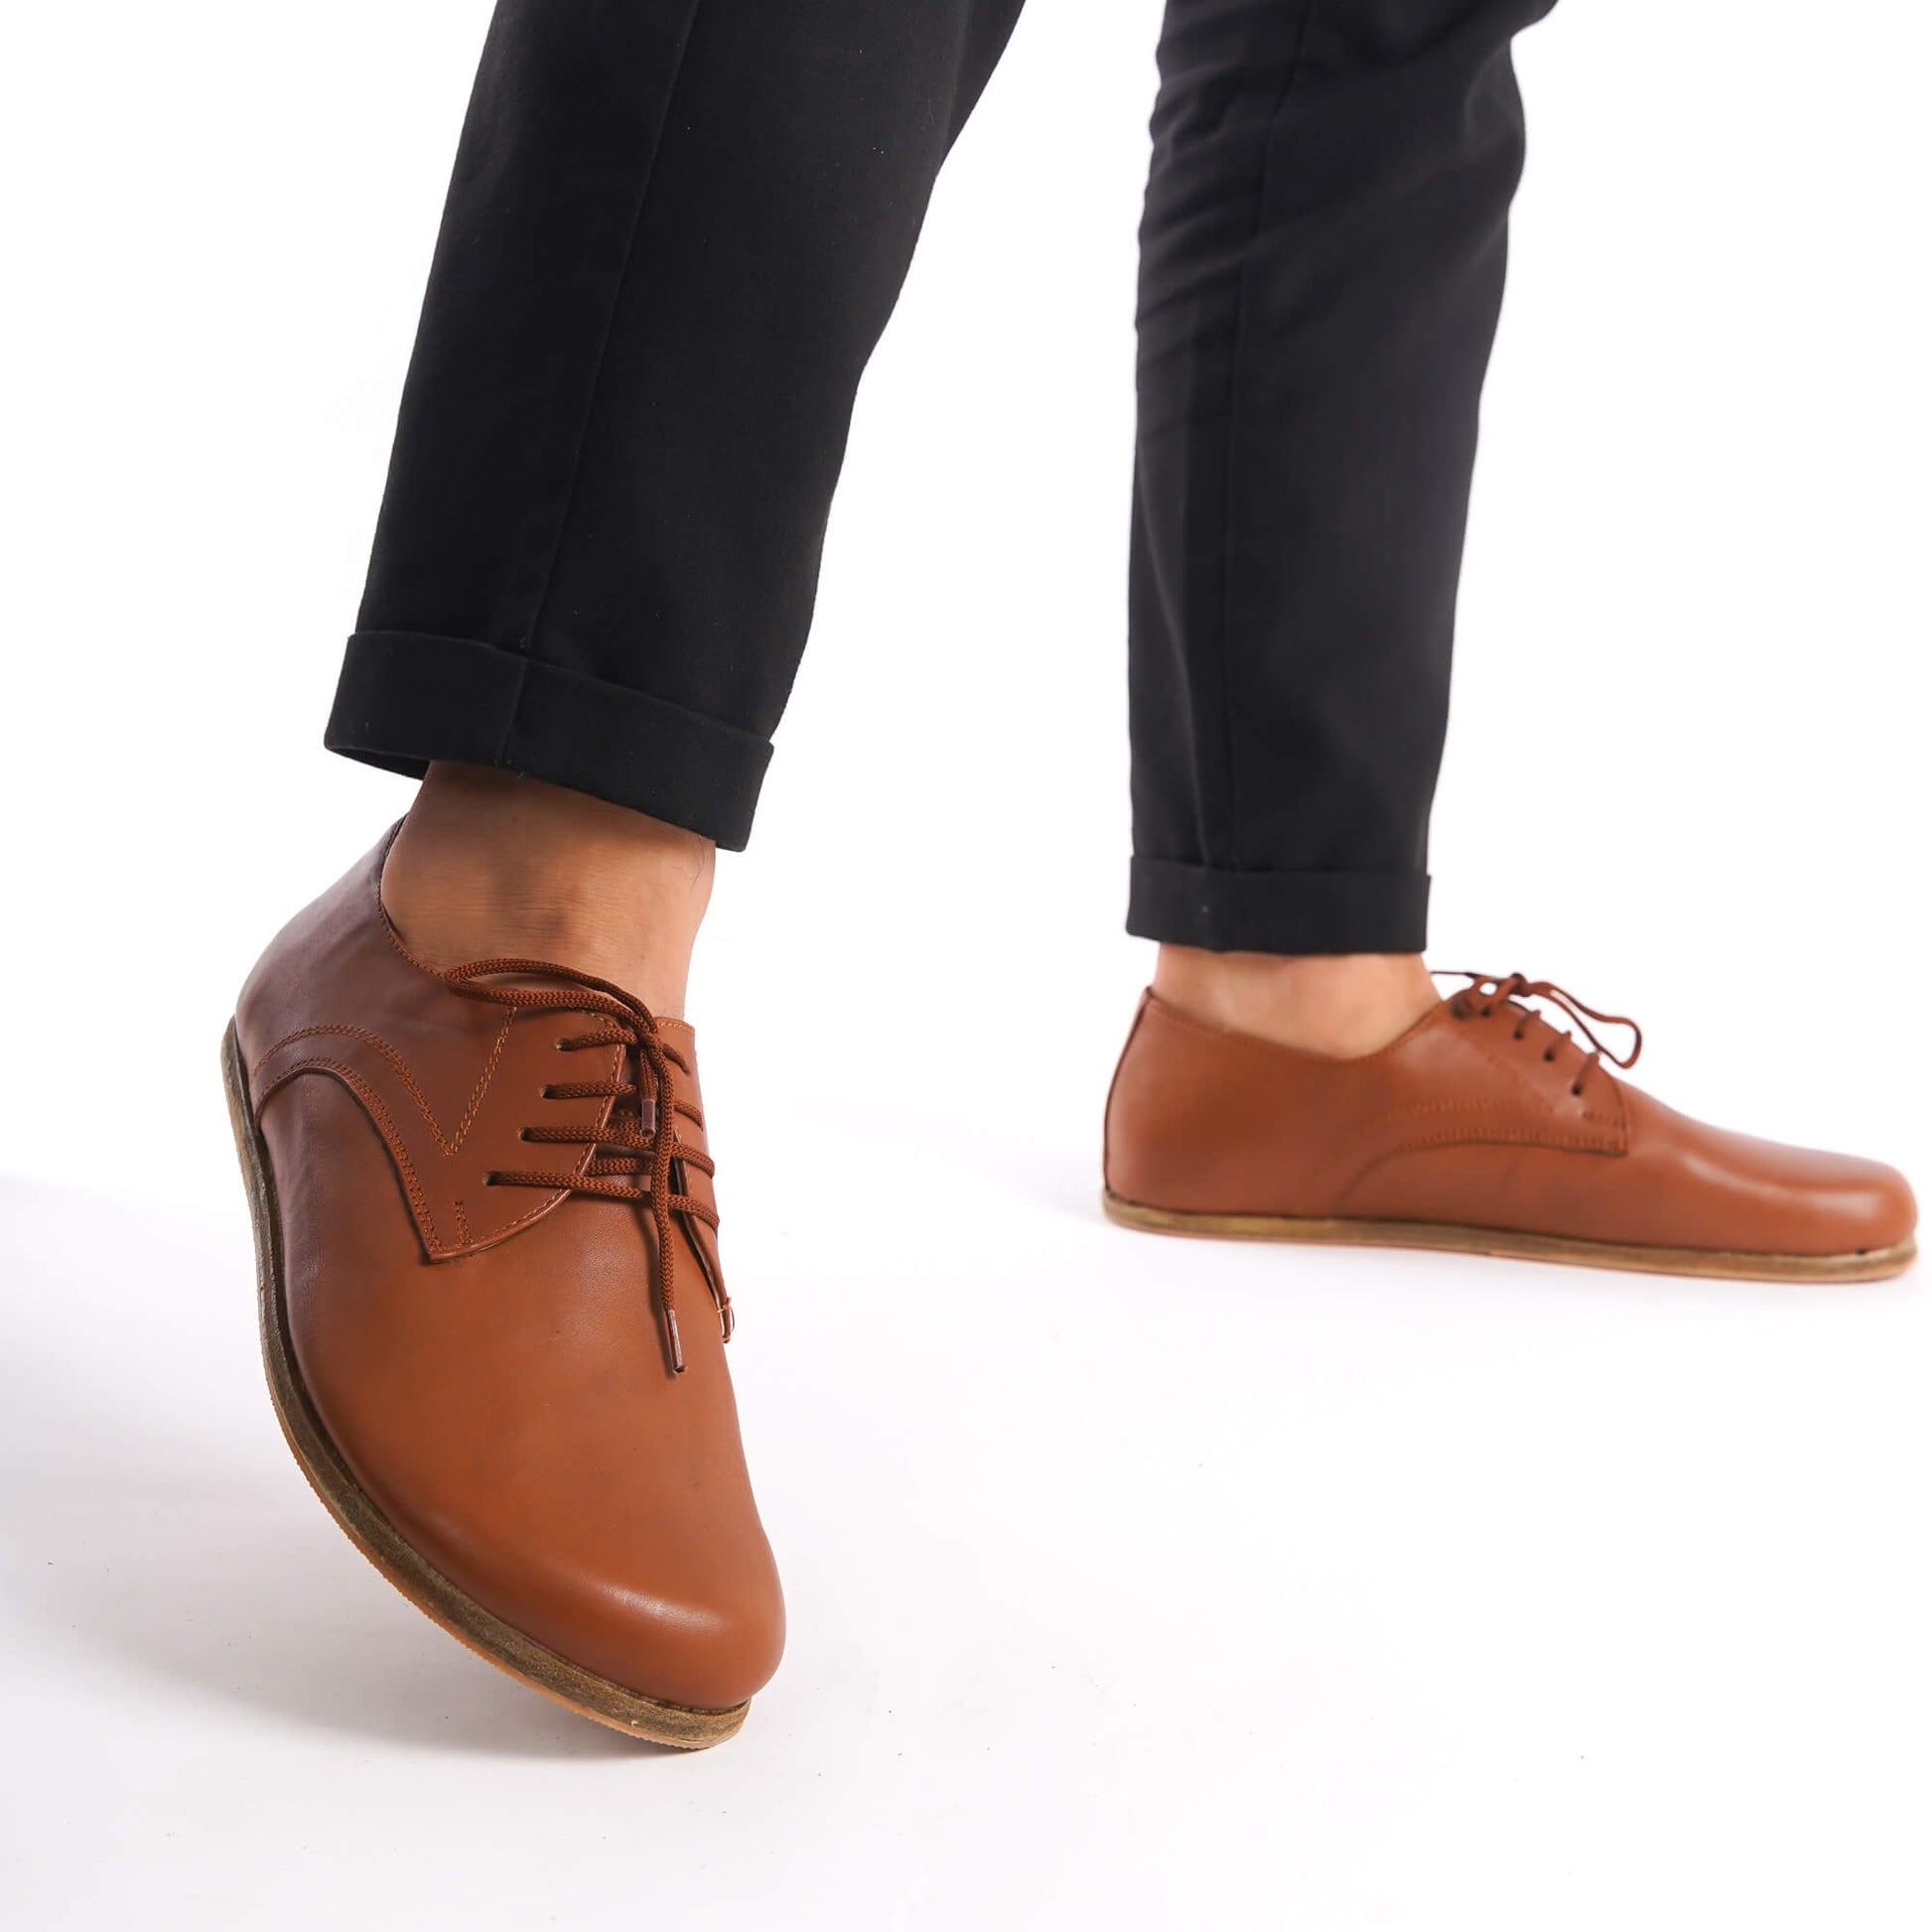 Walking shot of Locris Leather Barefoot Men's Oxfords in tan brown, highlighting their natural fit and foot health benefits.